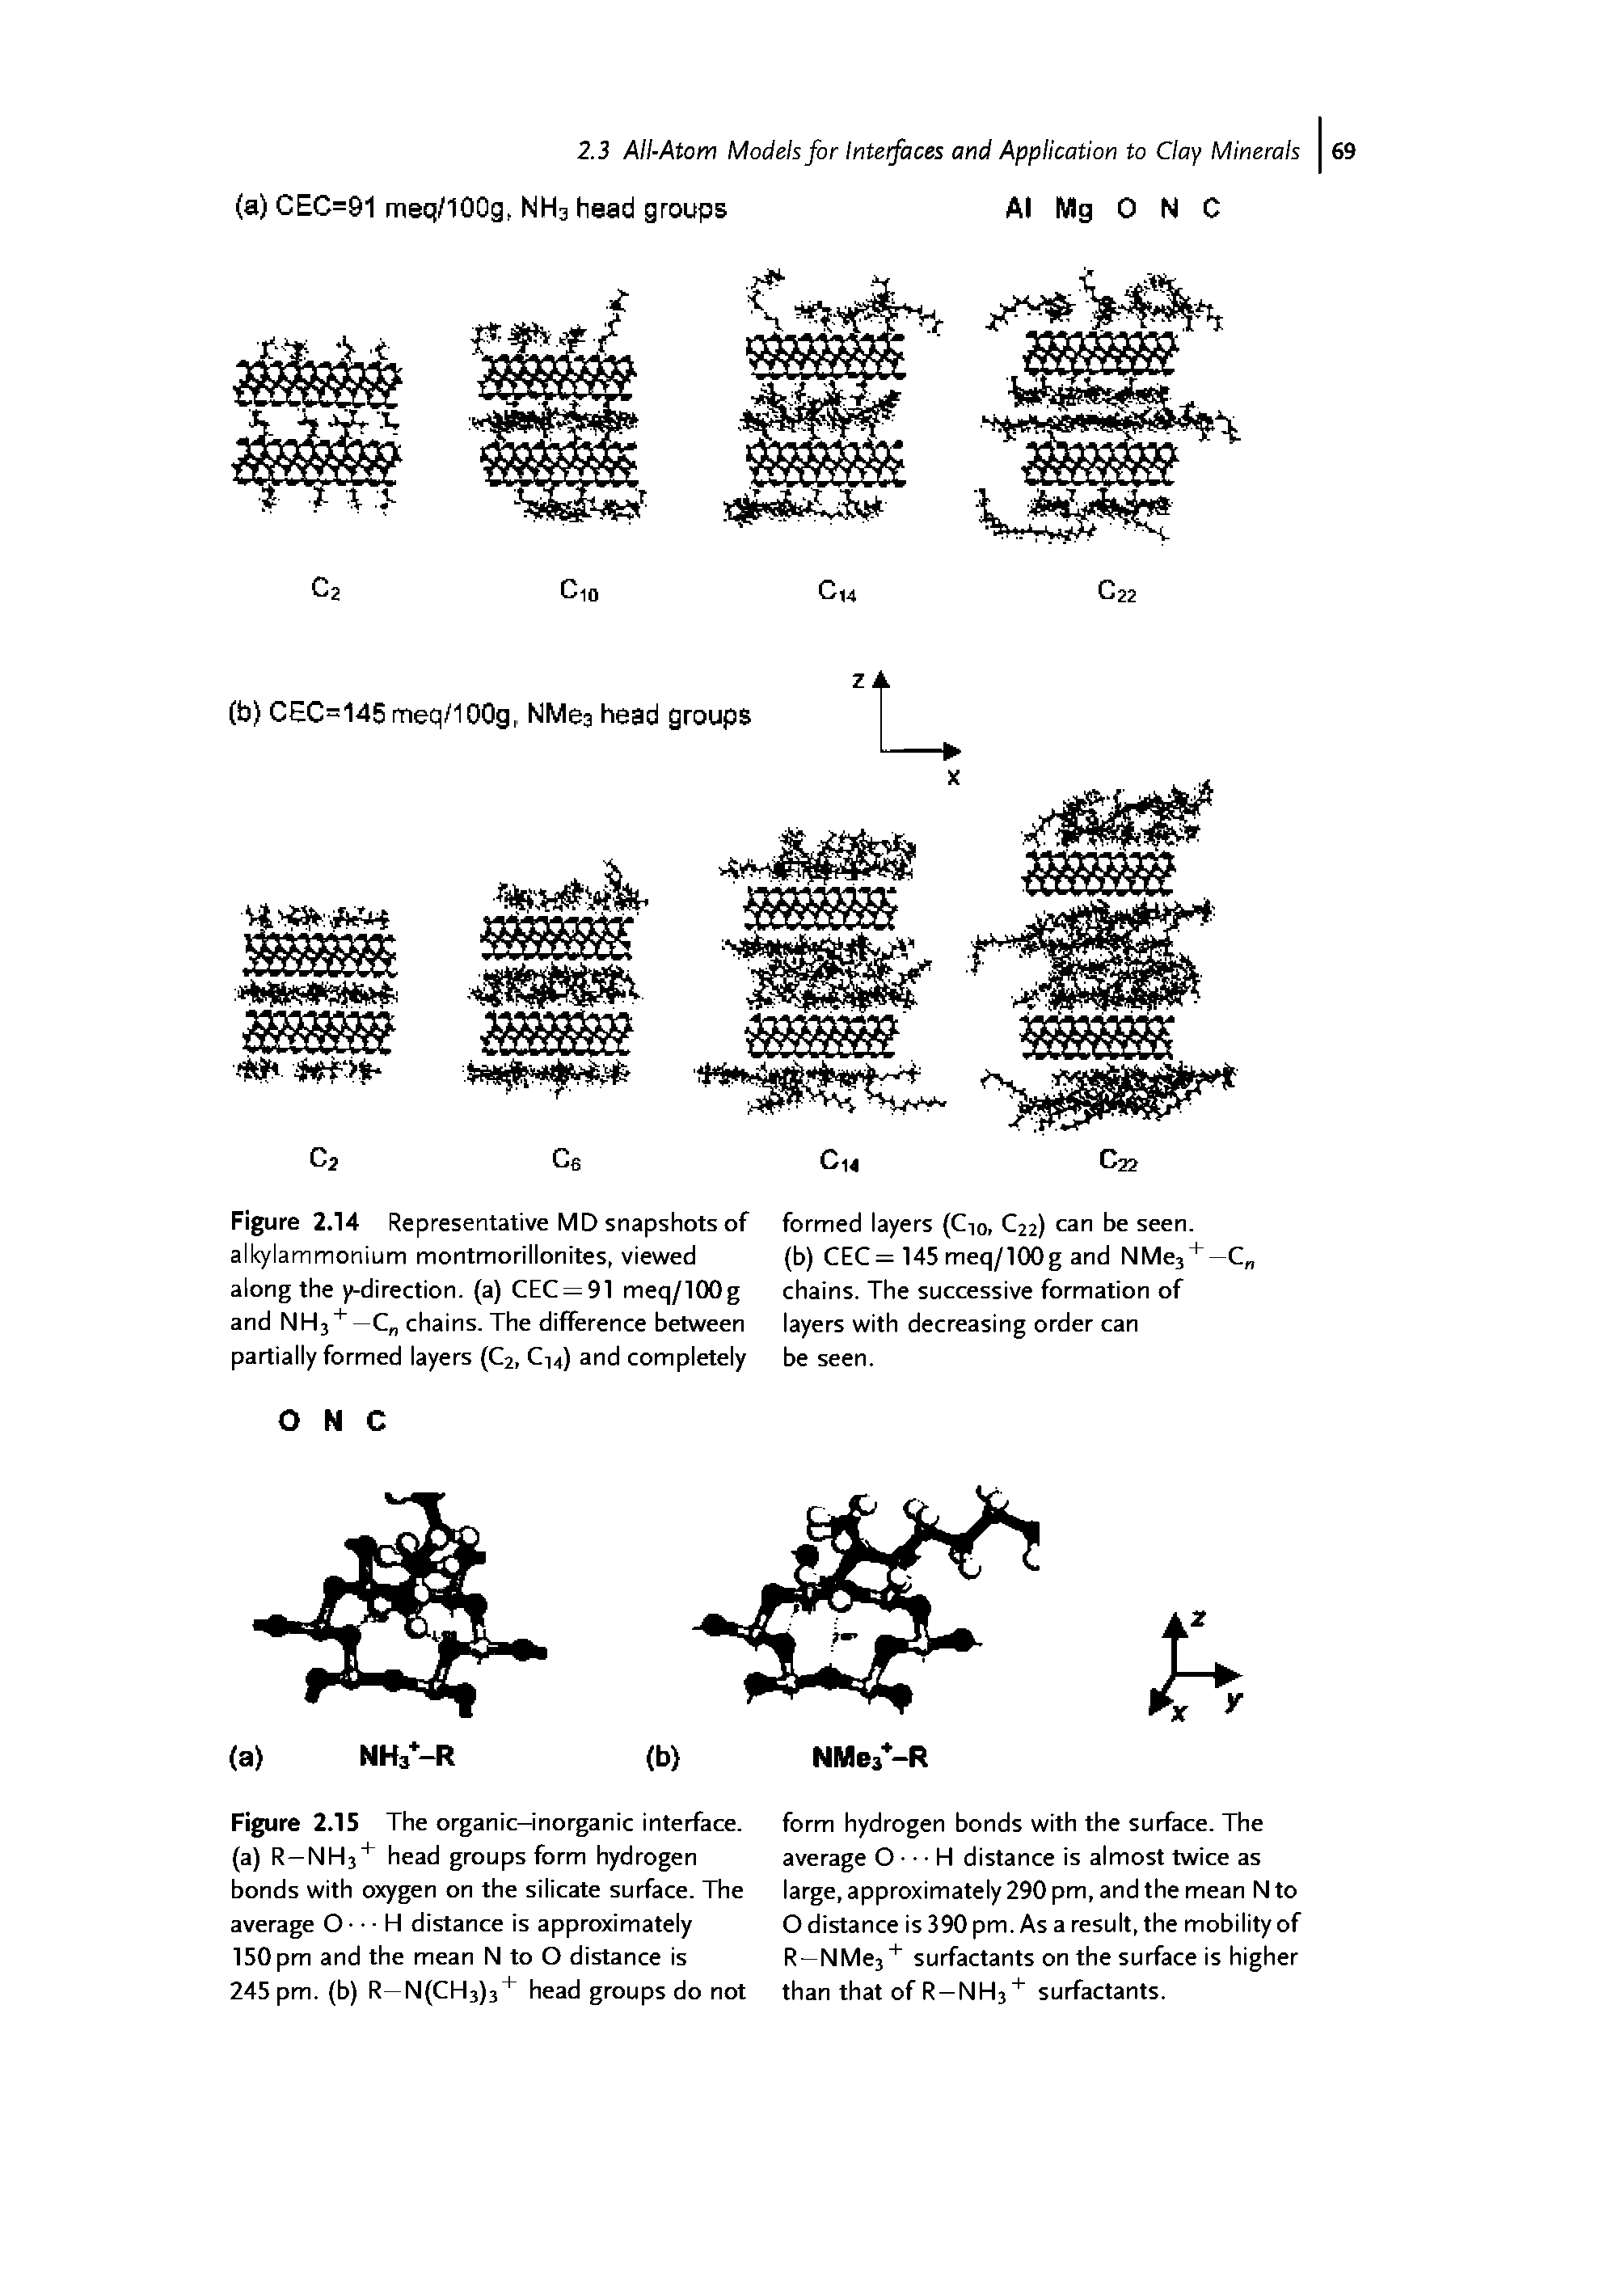 Figure 2.15 The organic-inorganic interface, (a) R—NH3" " head groups form hydrogen bonds with oxygen on the silicate surface. The average O - H distance is approximately 150 pm and the mean N to O distance is 245 pm. (b) R—N(CH3)3" head groups do not...